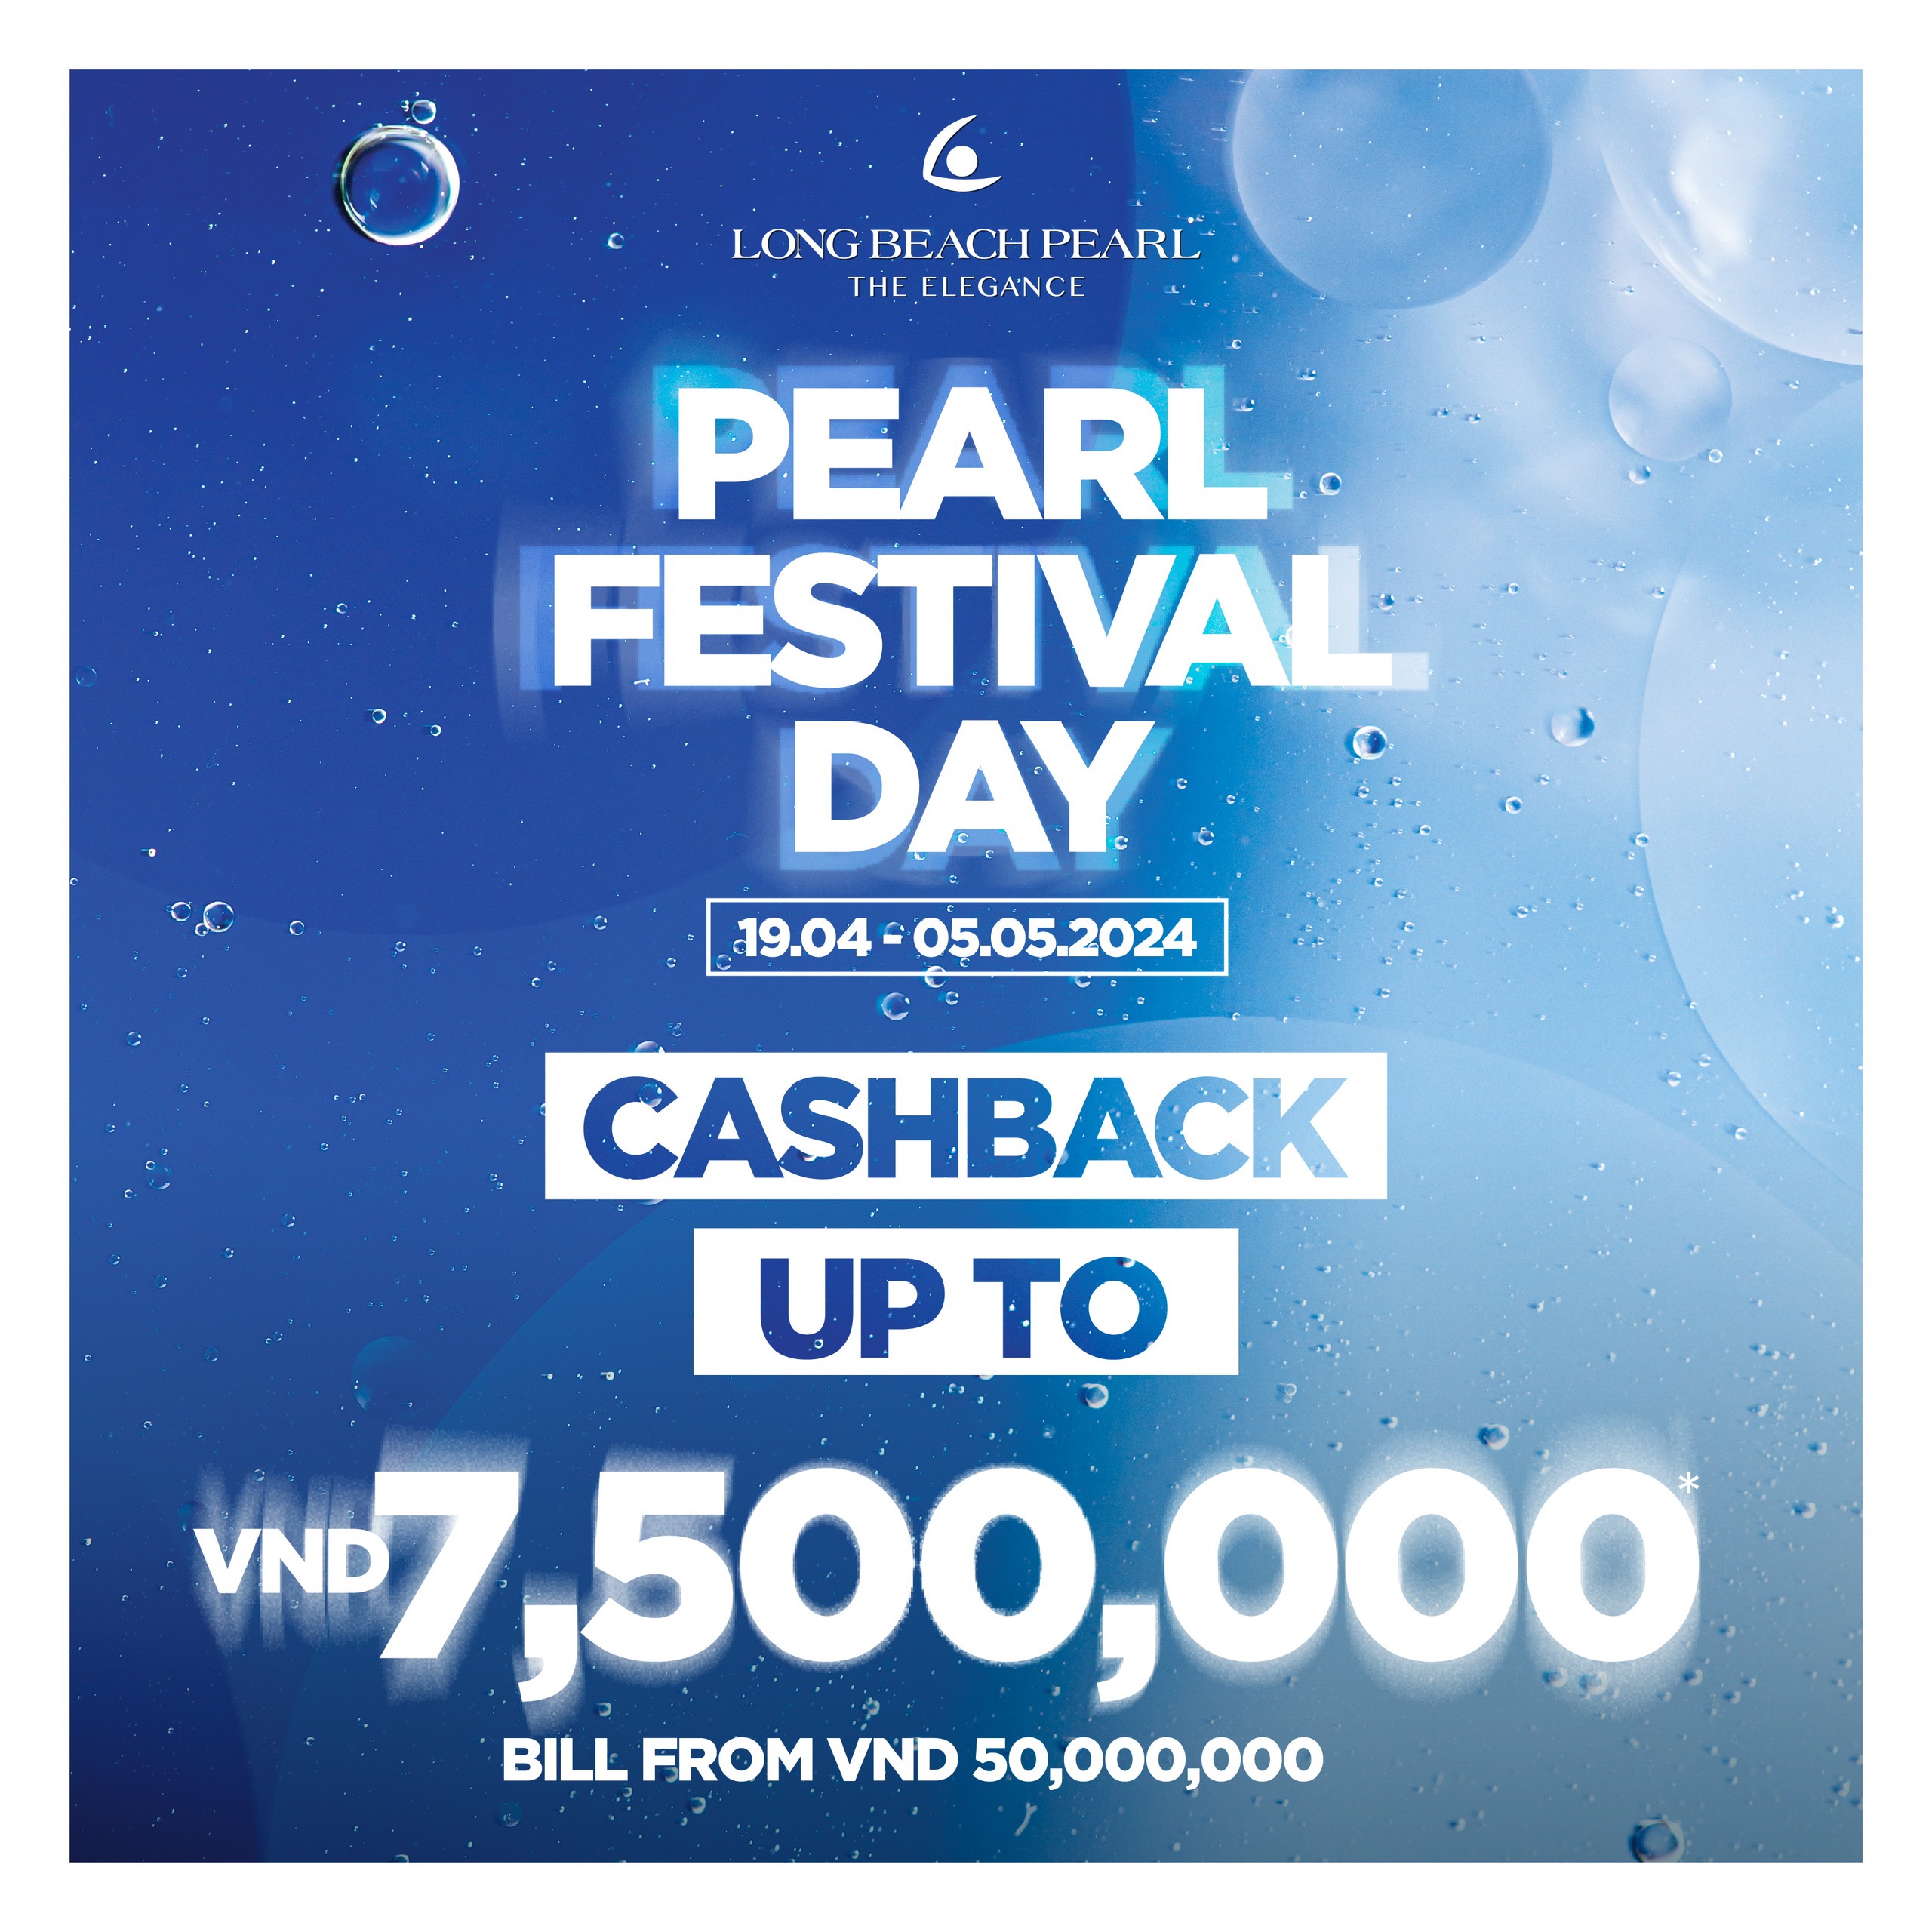 LONG BEACH PEARL - CASHBACK UP TO VND 7,500,000